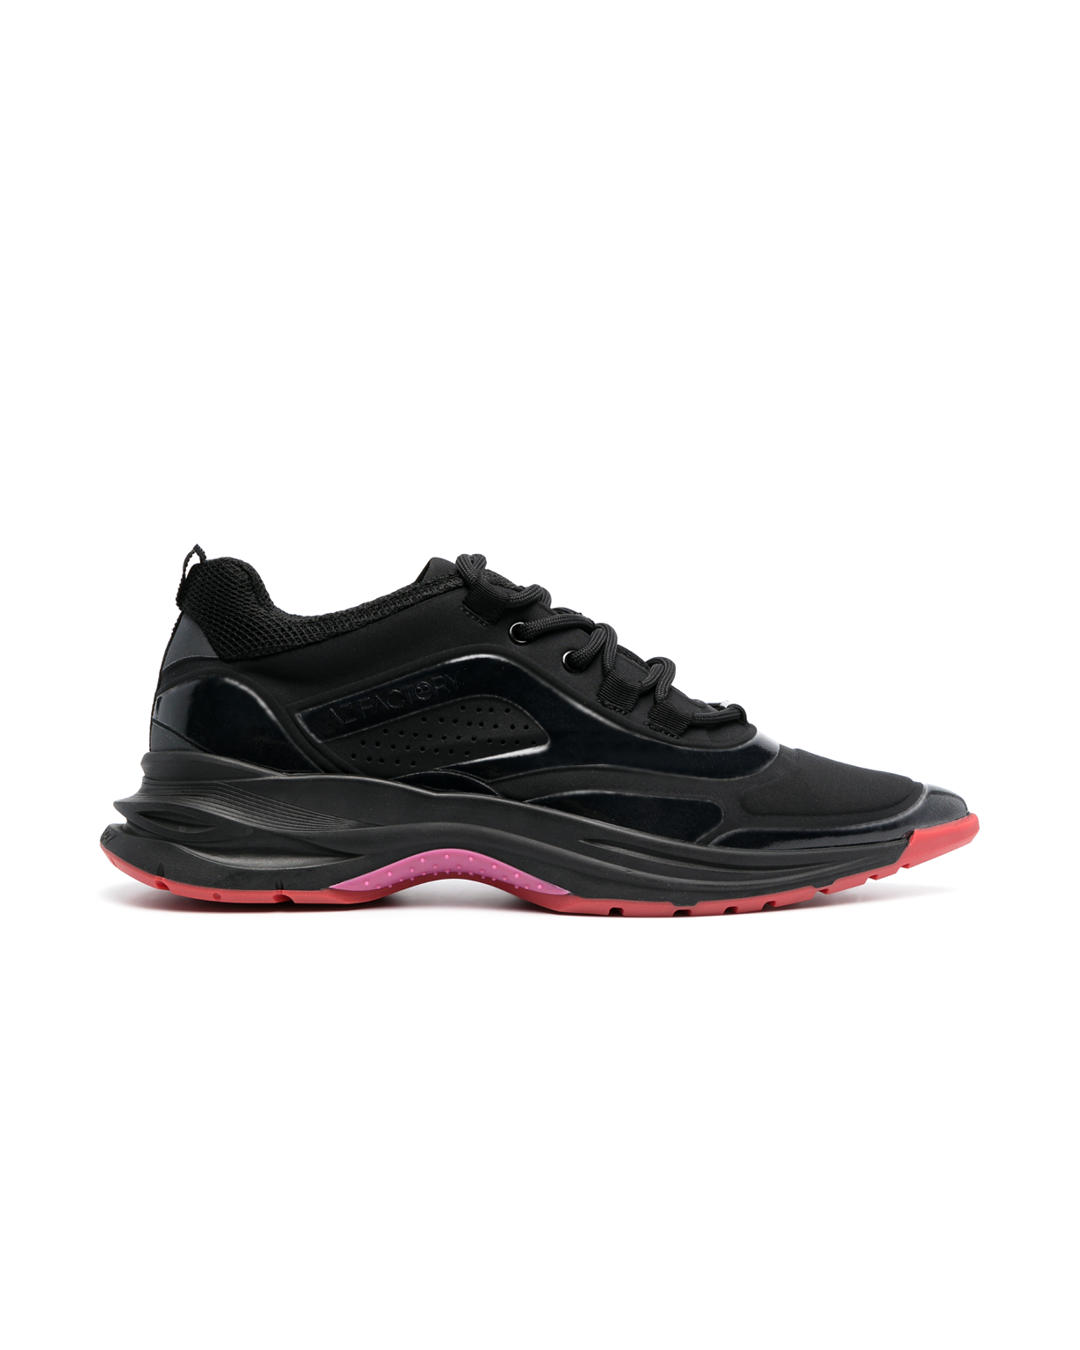 Nike Air Max Command Black and Pink Sneaker Editorial Image - Image of  sneaker, nike: 151082540